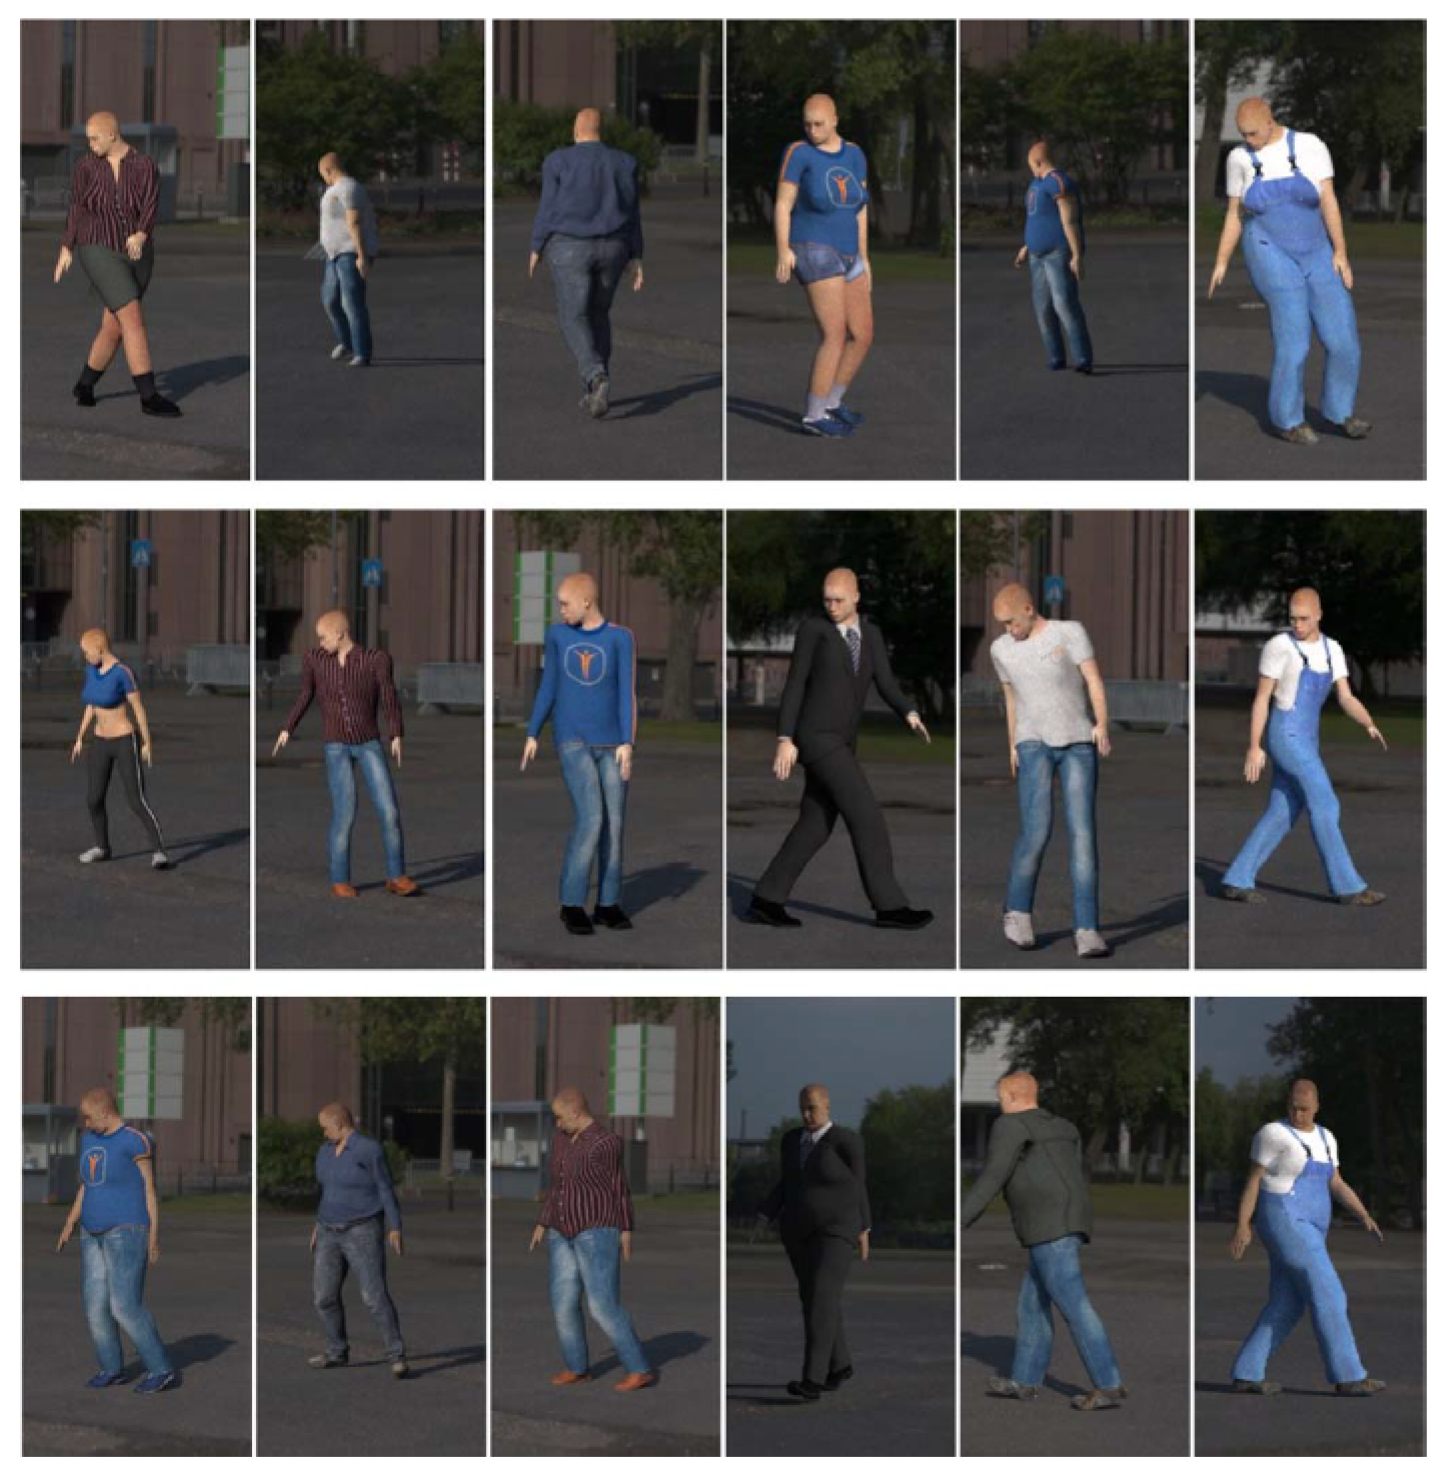 Walking poses - The Sims 4 Mods - CurseForge